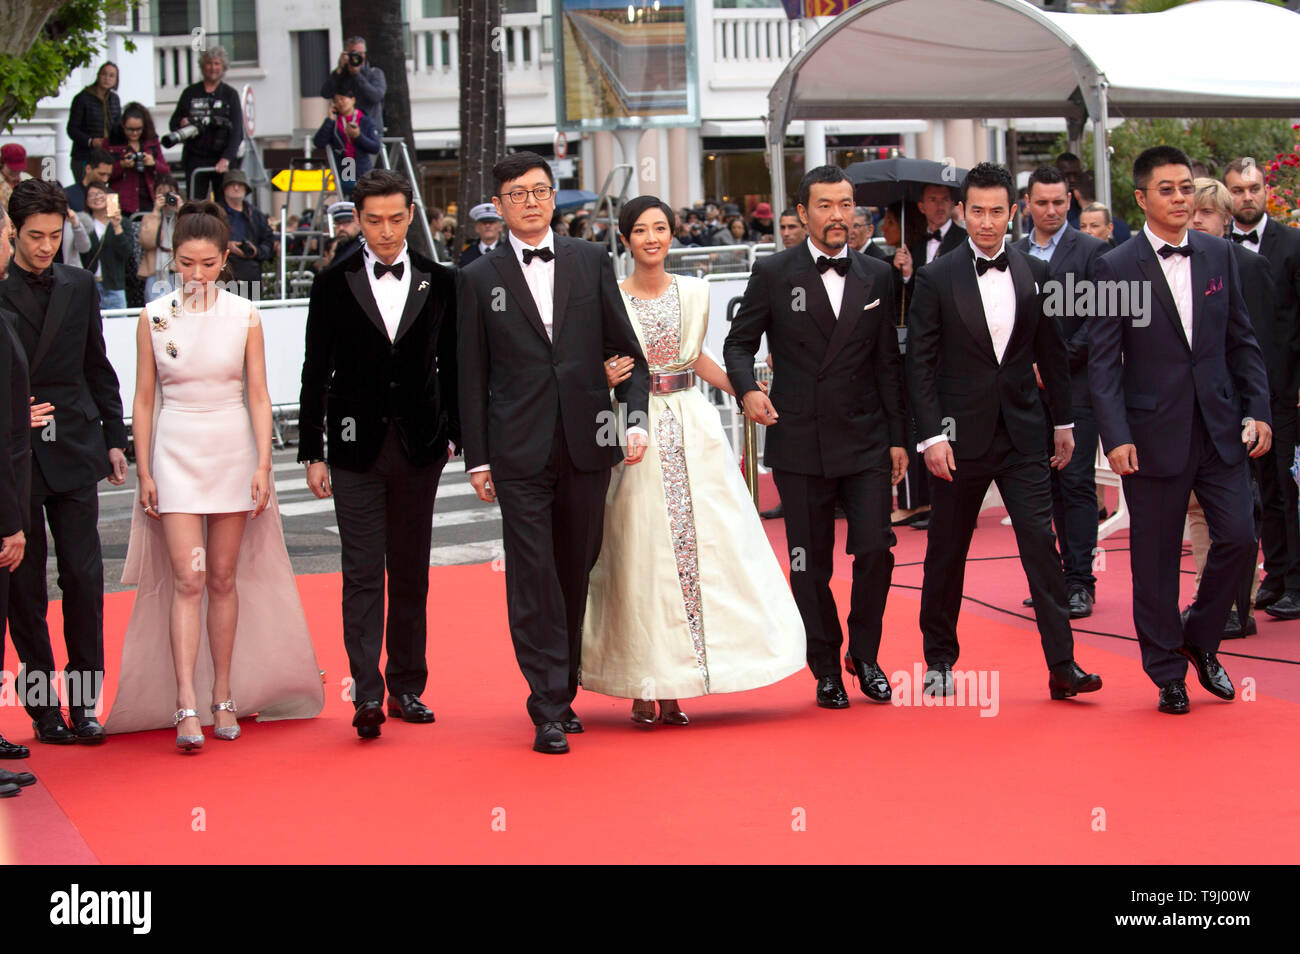 Cannes, France. 18th May, 2019. Zhang Yicong, Wan Qian, Hu Ge, Diao Yinan, Gwei Lun Mei, Liao Fan, Qi Dao and Dong Jingsong attending the 'Nan Fang Che Zhan De Ju Hui / The Wild Goose Lake' premiere during the 72nd Cannes Film Festival at the Palais des Festivals on May 18, 2019 in Cannes, France Credit: Geisler-Fotopress GmbH/Alamy Live News Stock Photo